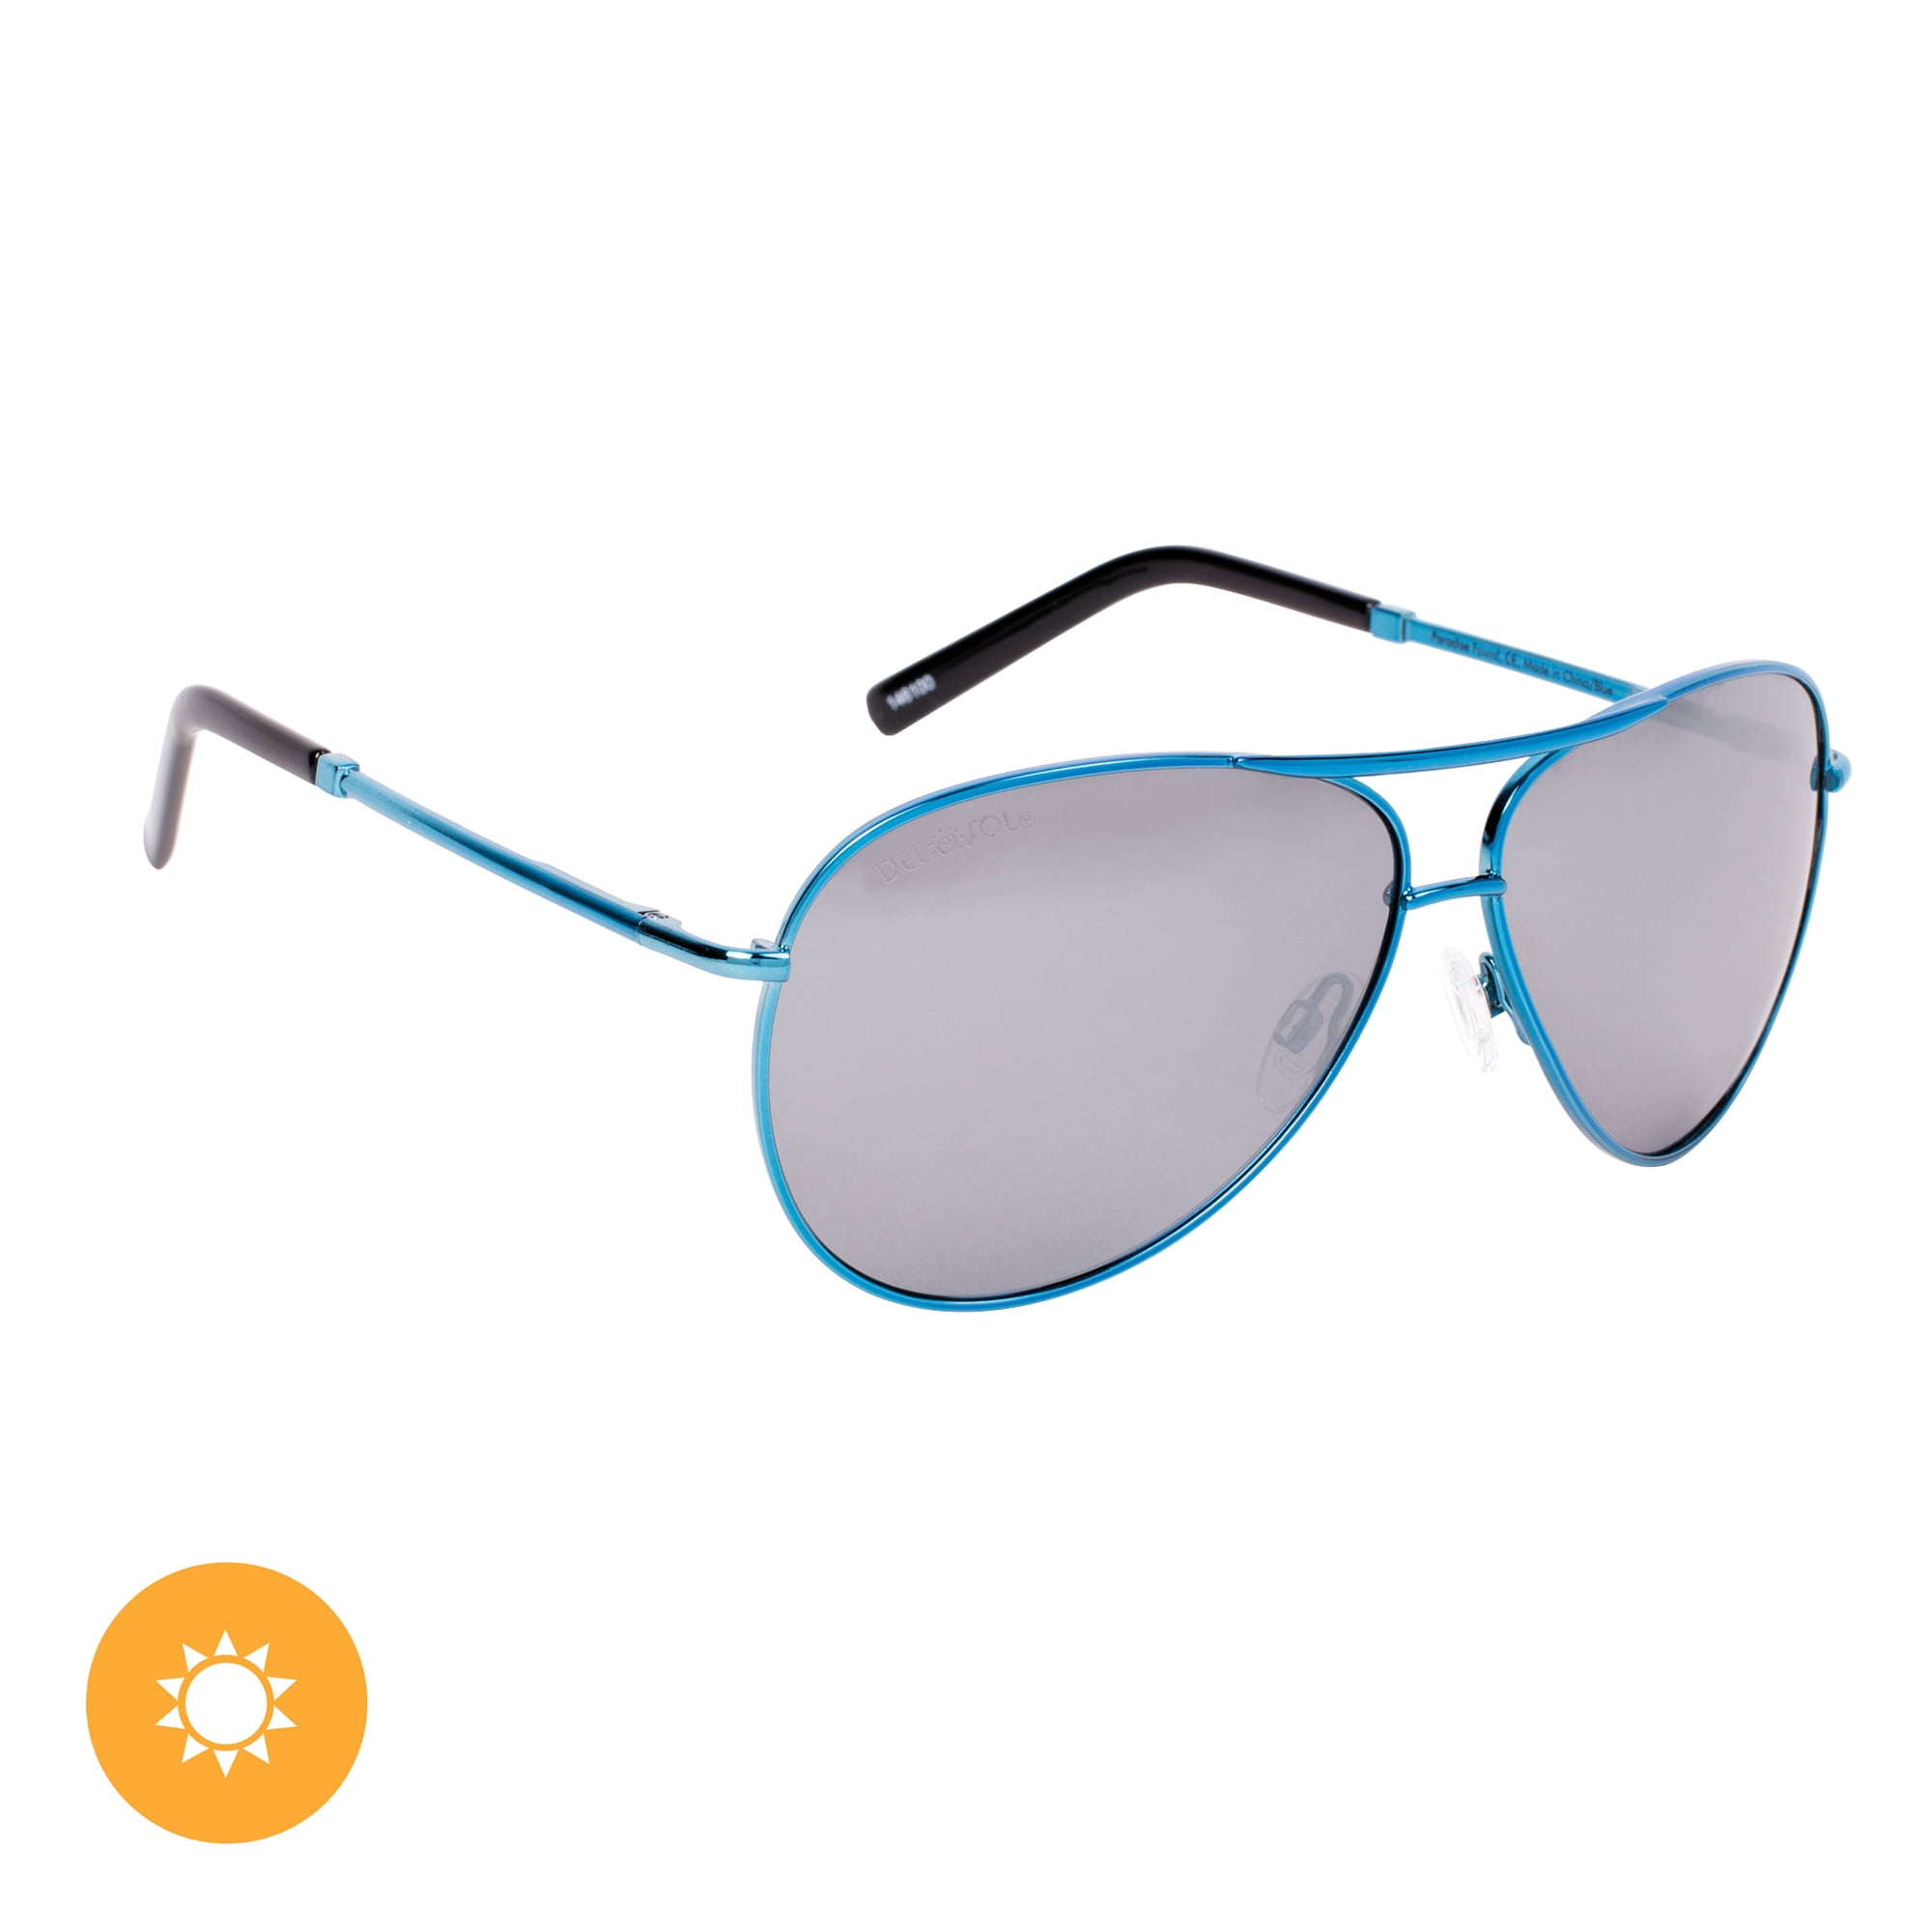 Del Sol Solize Color-Changing Unisex Sunglasses - Paradise Found - Changes  Color from Silver to Blue in the Sun - Polarized Pro, Mirrored Lens, 100%  